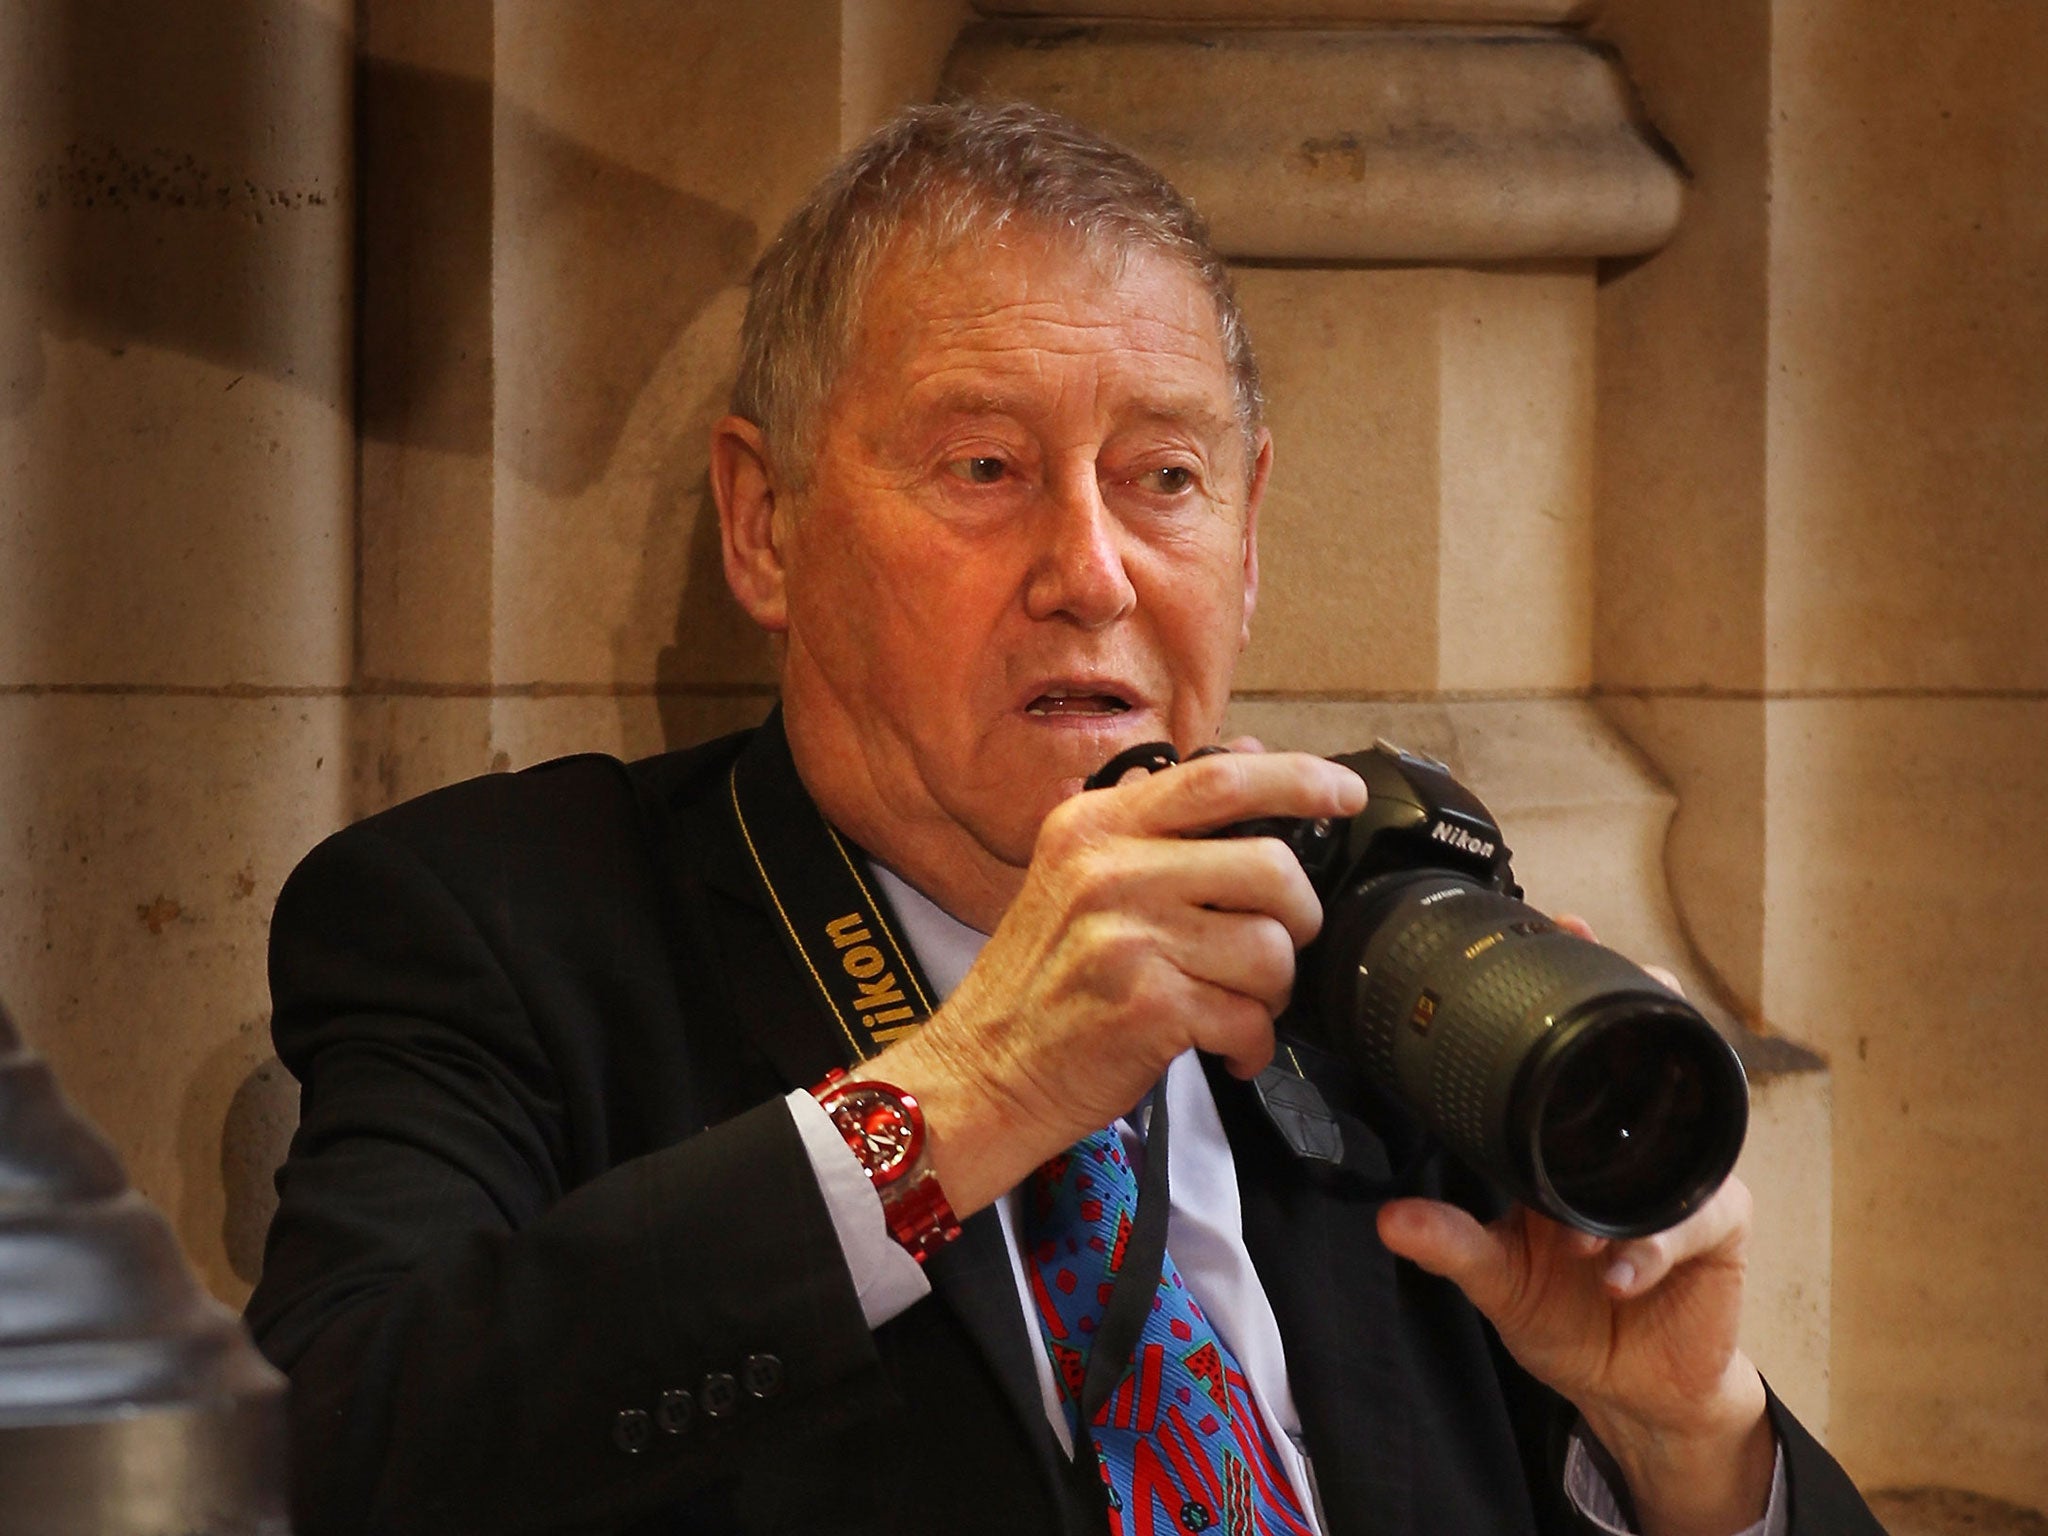 Austin Mitchell, pictured here in 2010, is one of the longest-serving MPs in the Commons